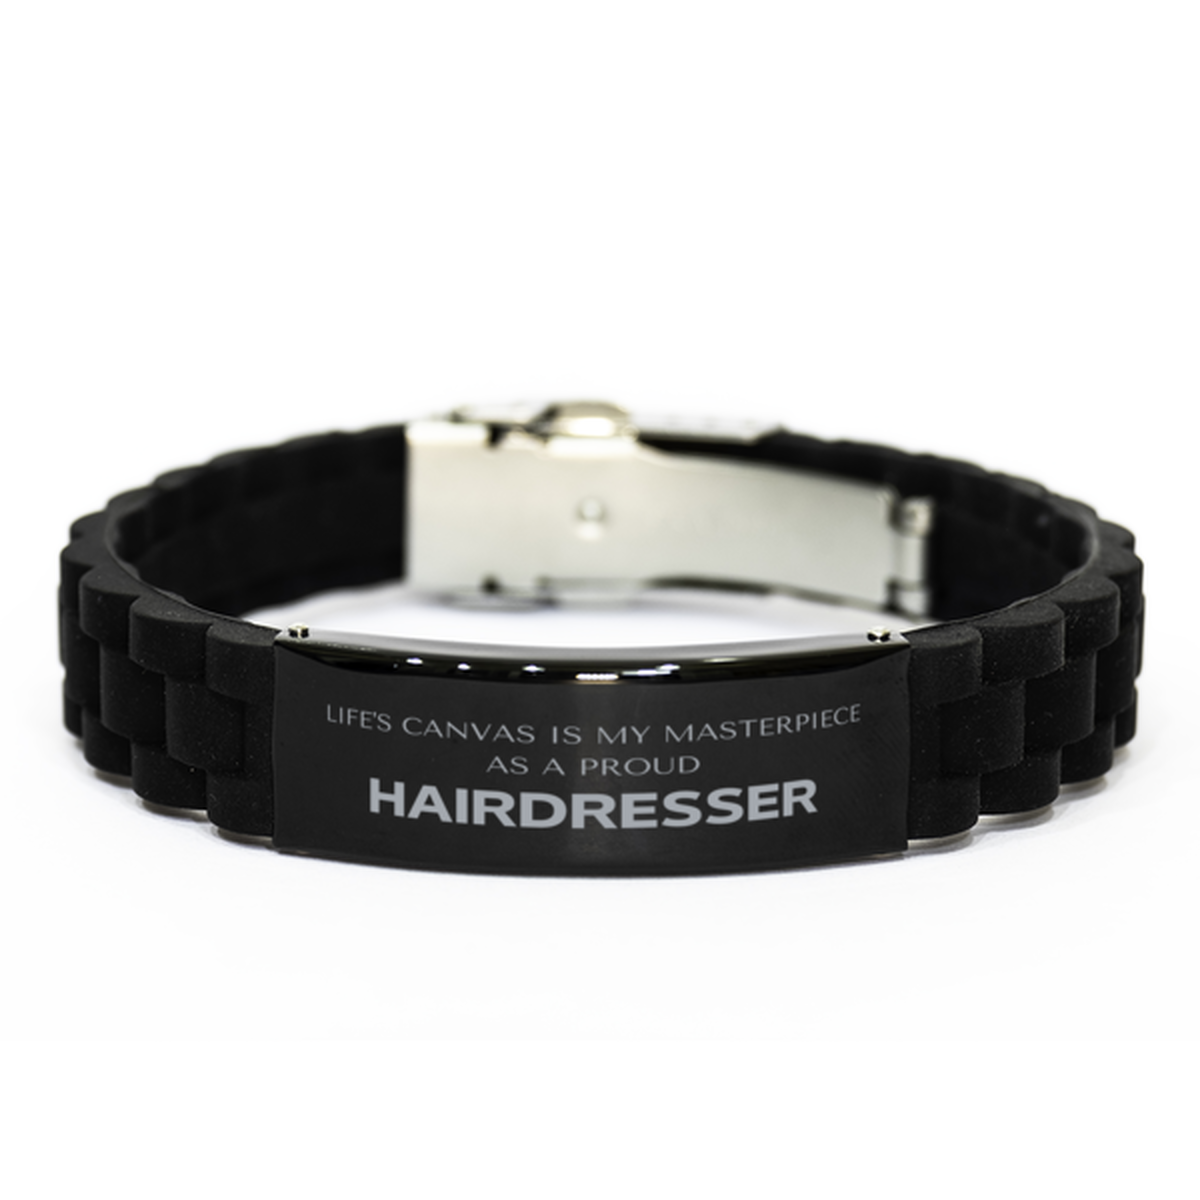 Proud Hairdresser Gifts, Life's canvas is my masterpiece, Epic Birthday Christmas Unique Black Glidelock Clasp Bracelet For Hairdresser, Coworkers, Men, Women, Friends